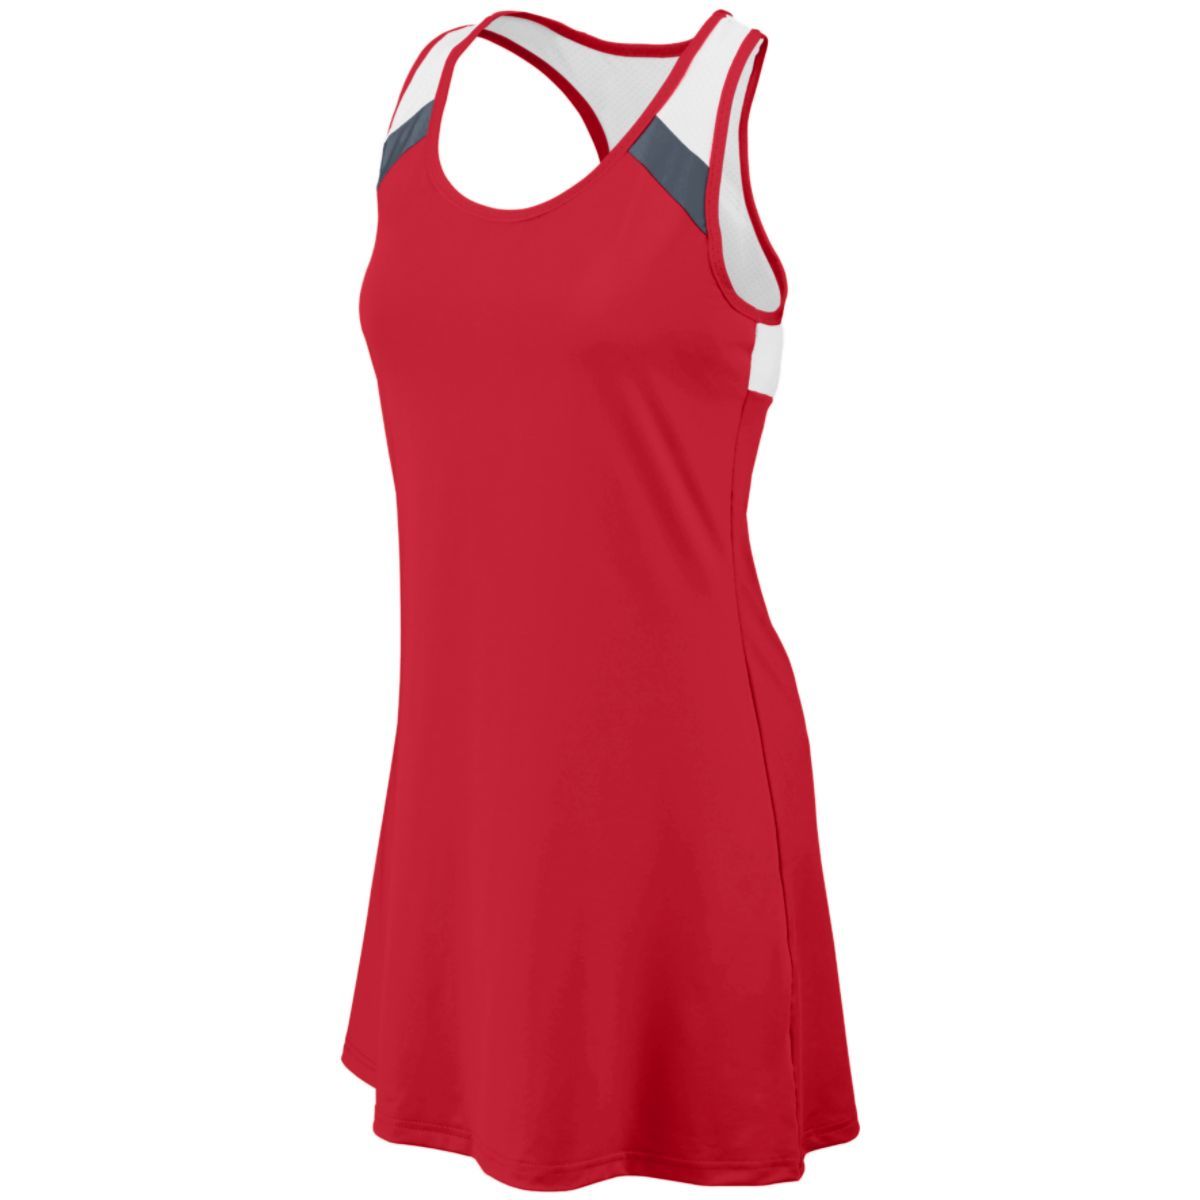 Augusta Sportswear Deuce Dress in Red/Graphite/White  -Part of the Ladies, Augusta-Products, Tennis, Shirts product lines at KanaleyCreations.com